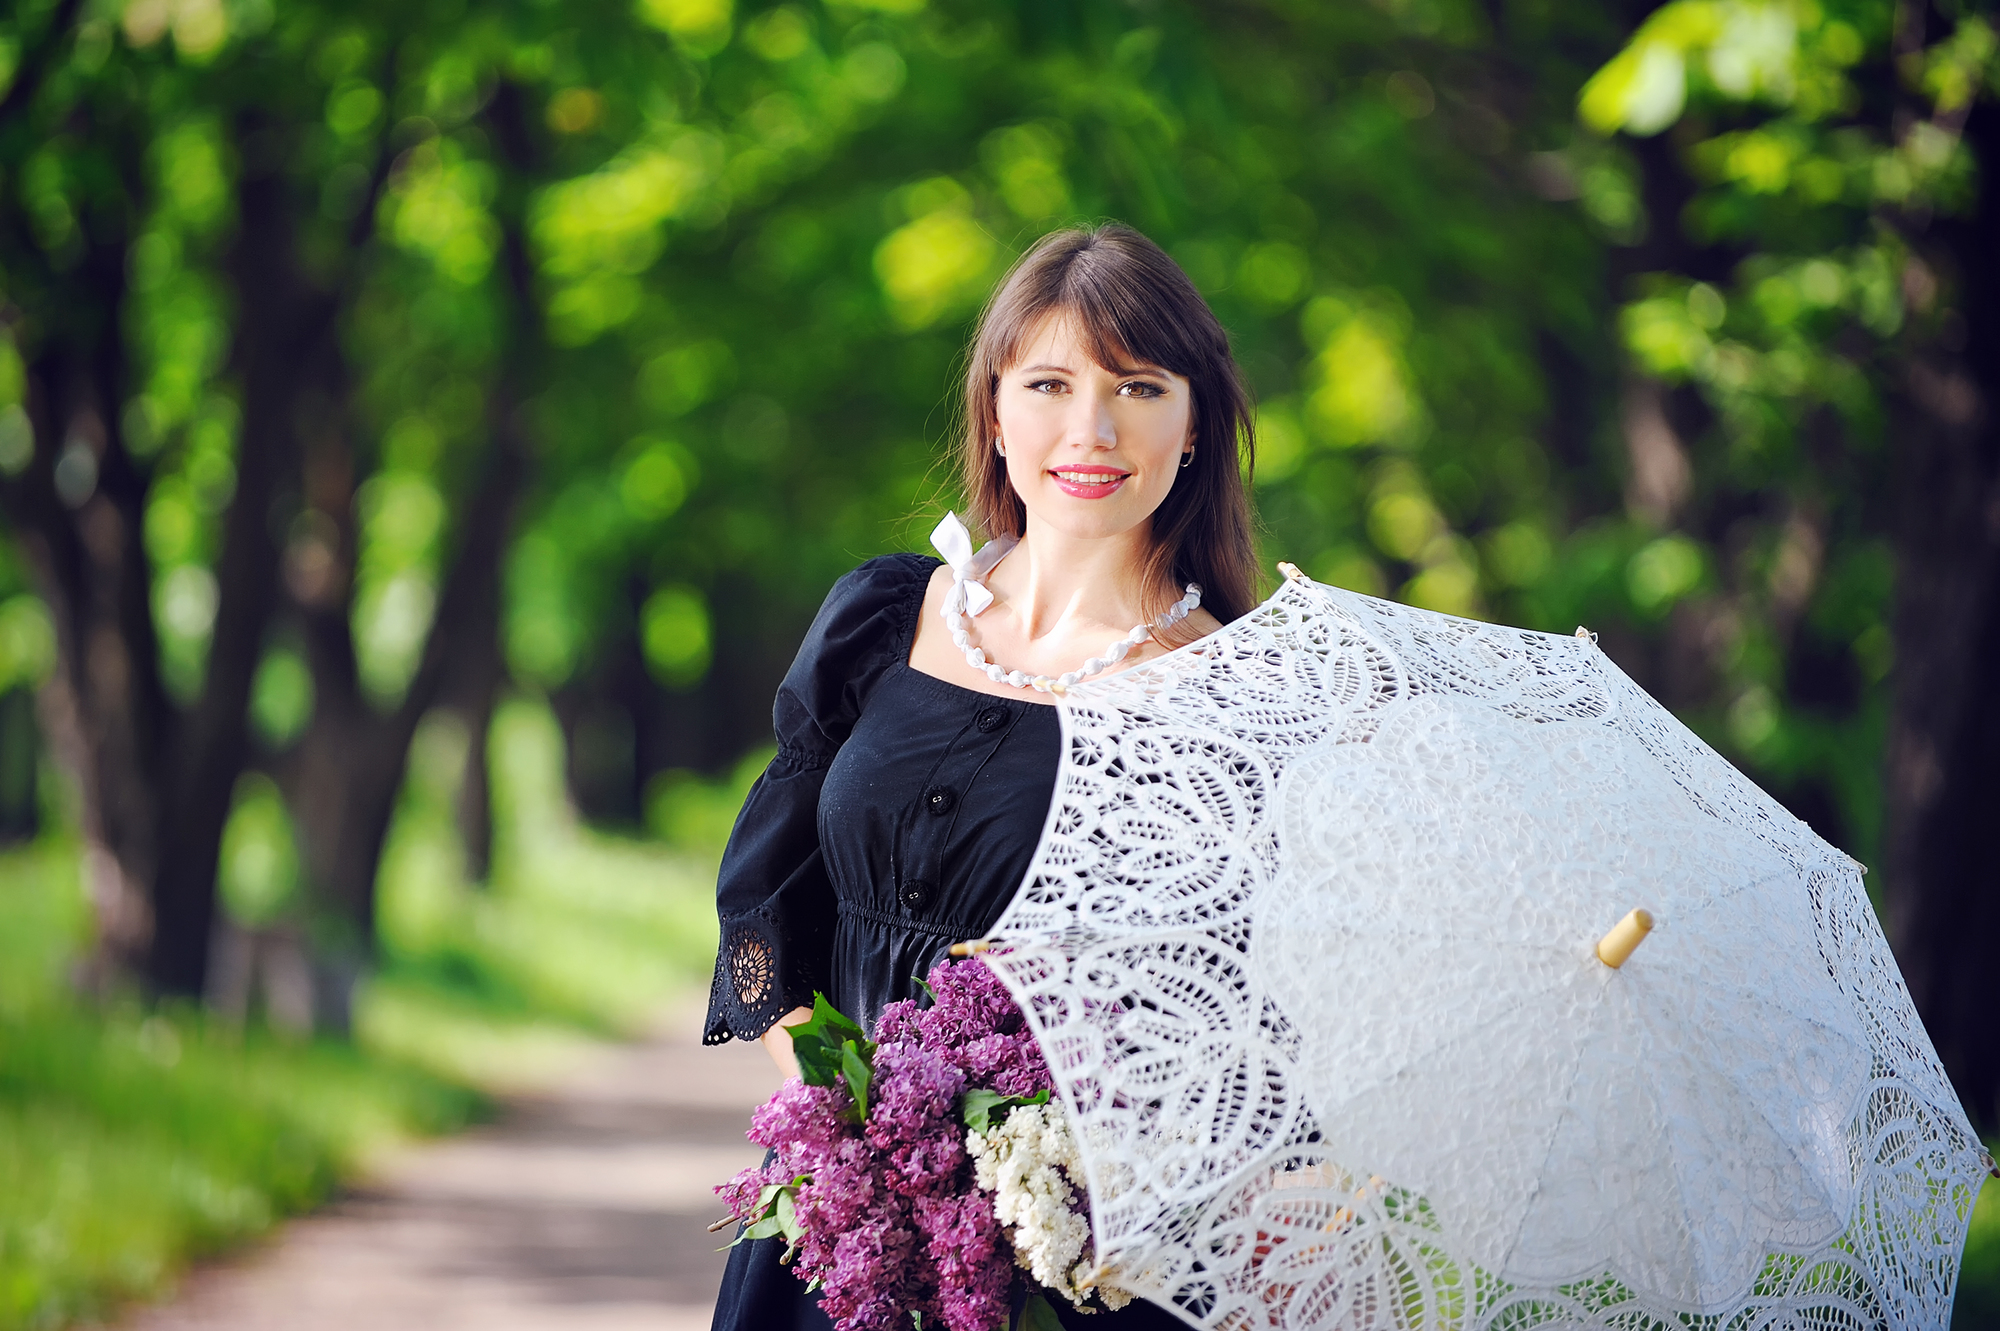 portrait of a young woman in a spring park with an umbrella.